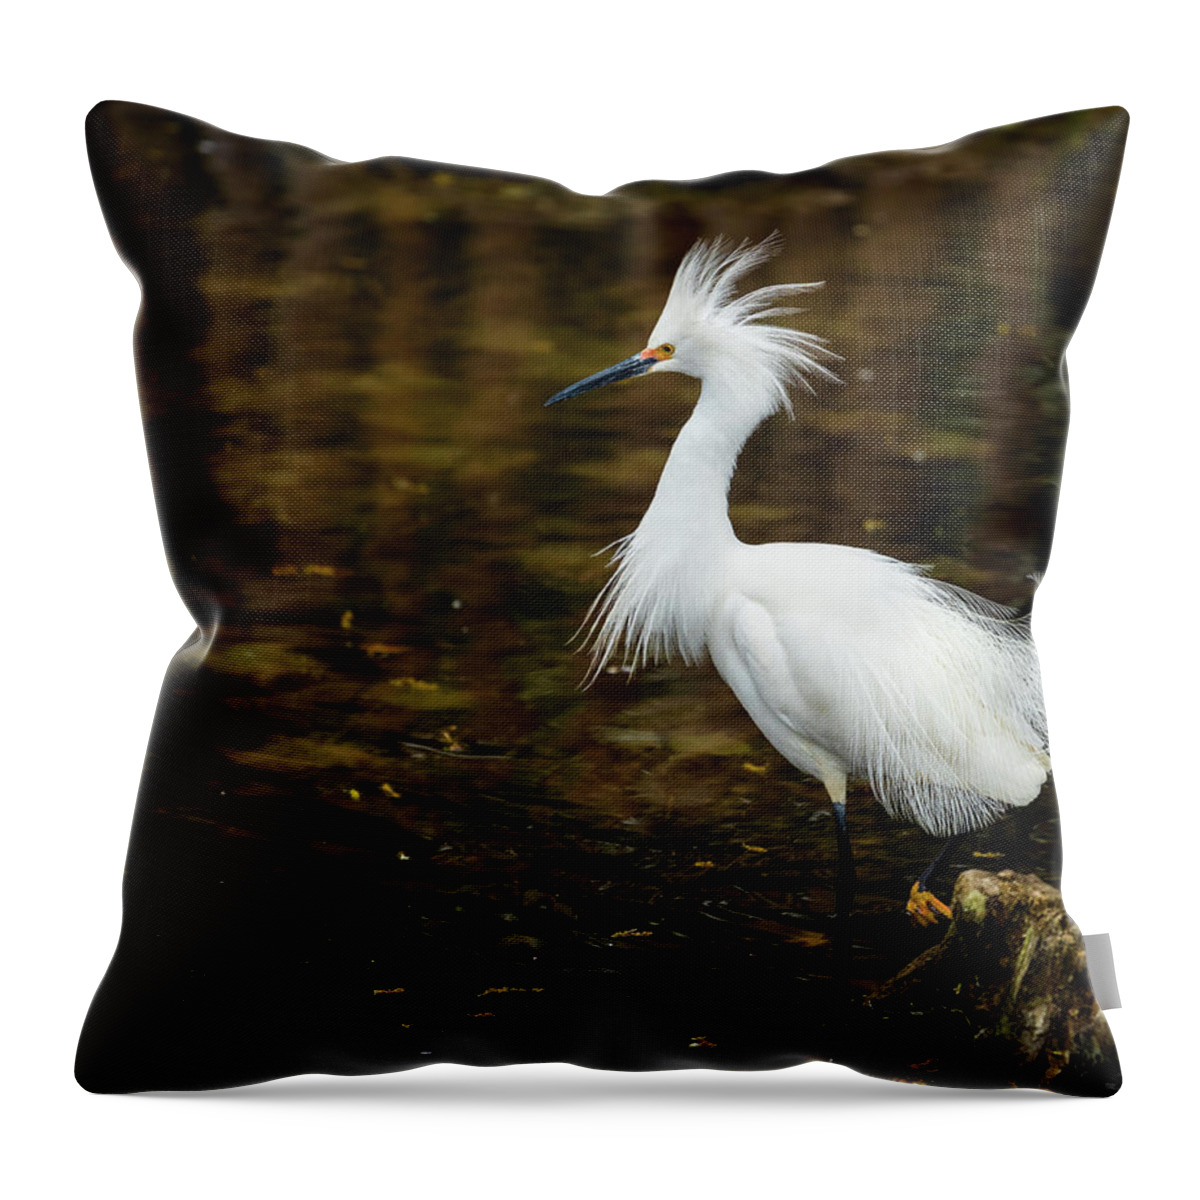  Throw Pillow featuring the photograph All Fluffed Up by Jim Miller